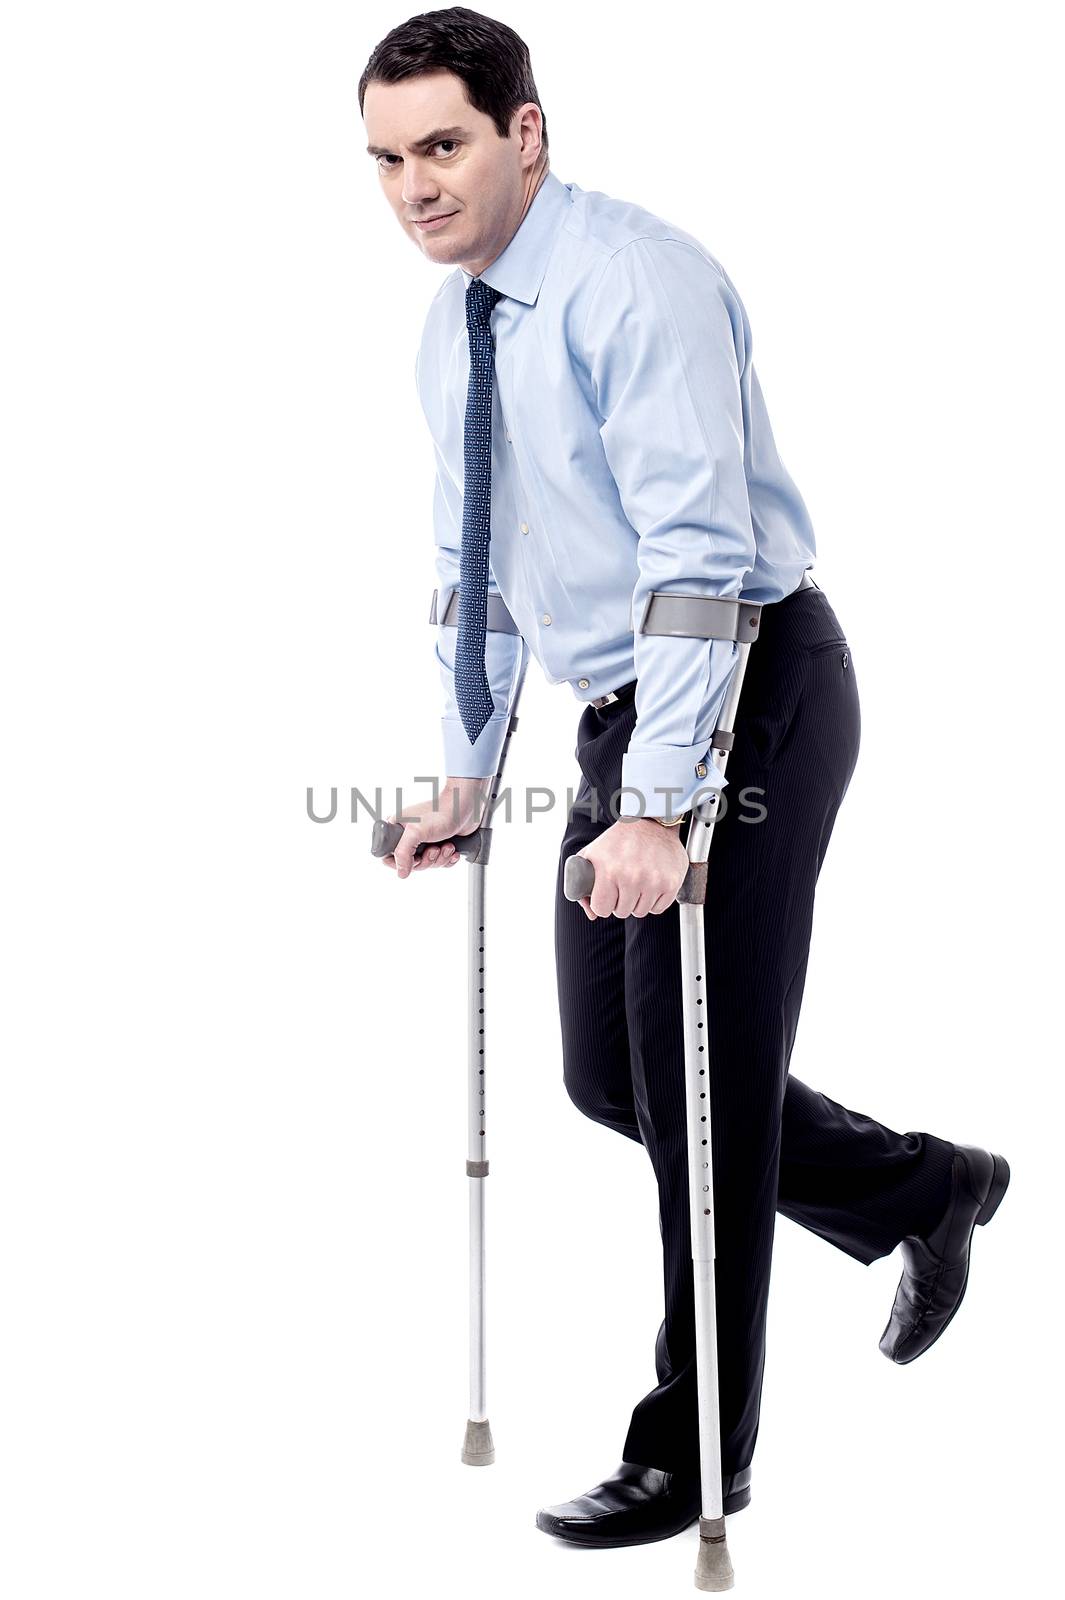 Crutches, help me to walk. by stockyimages